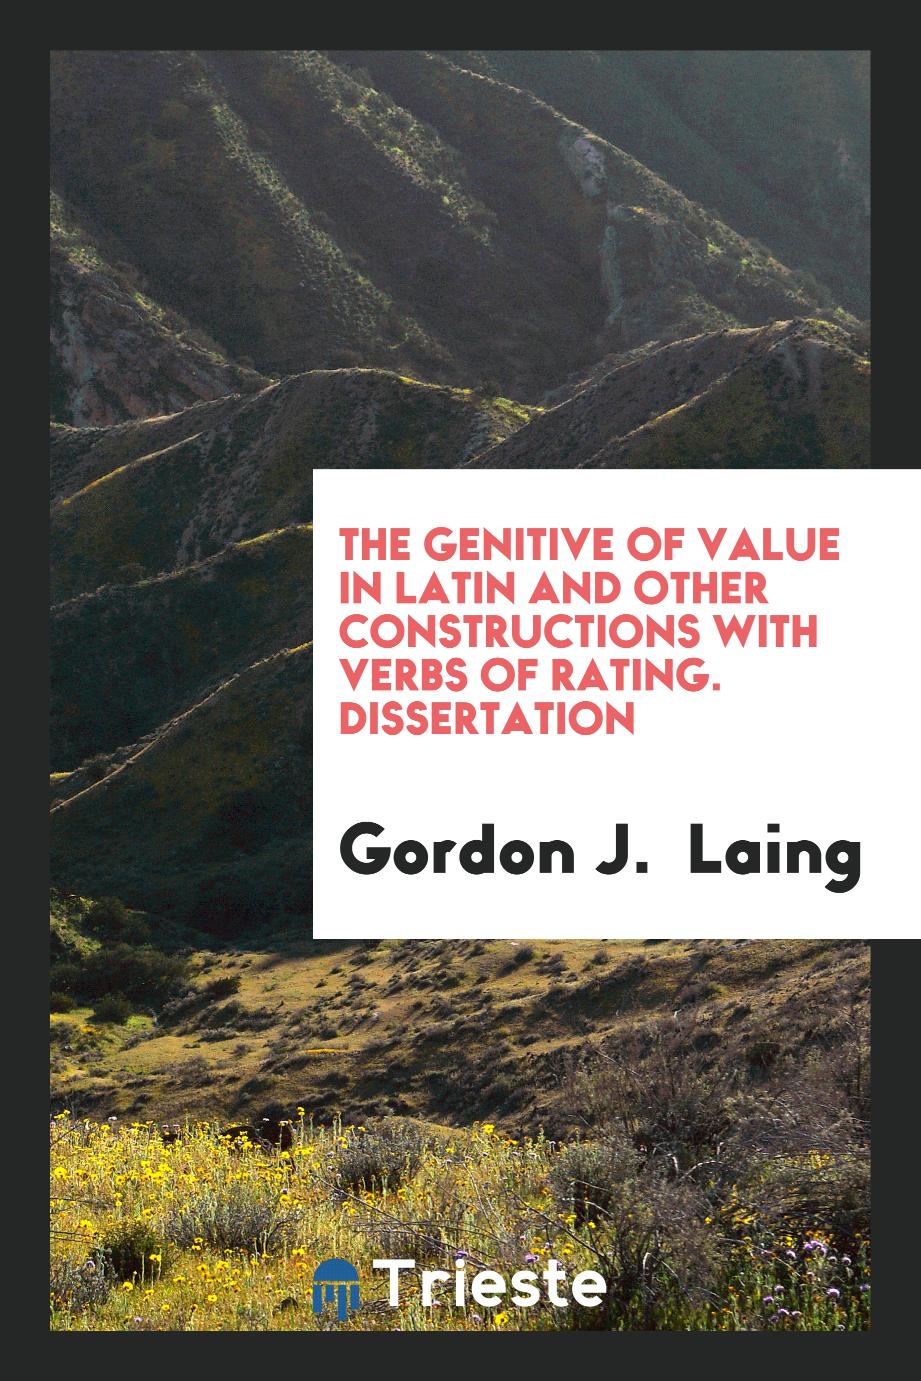 The Genitive of Value in Latin and Other Constructions with Verbs of Rating. Dissertation